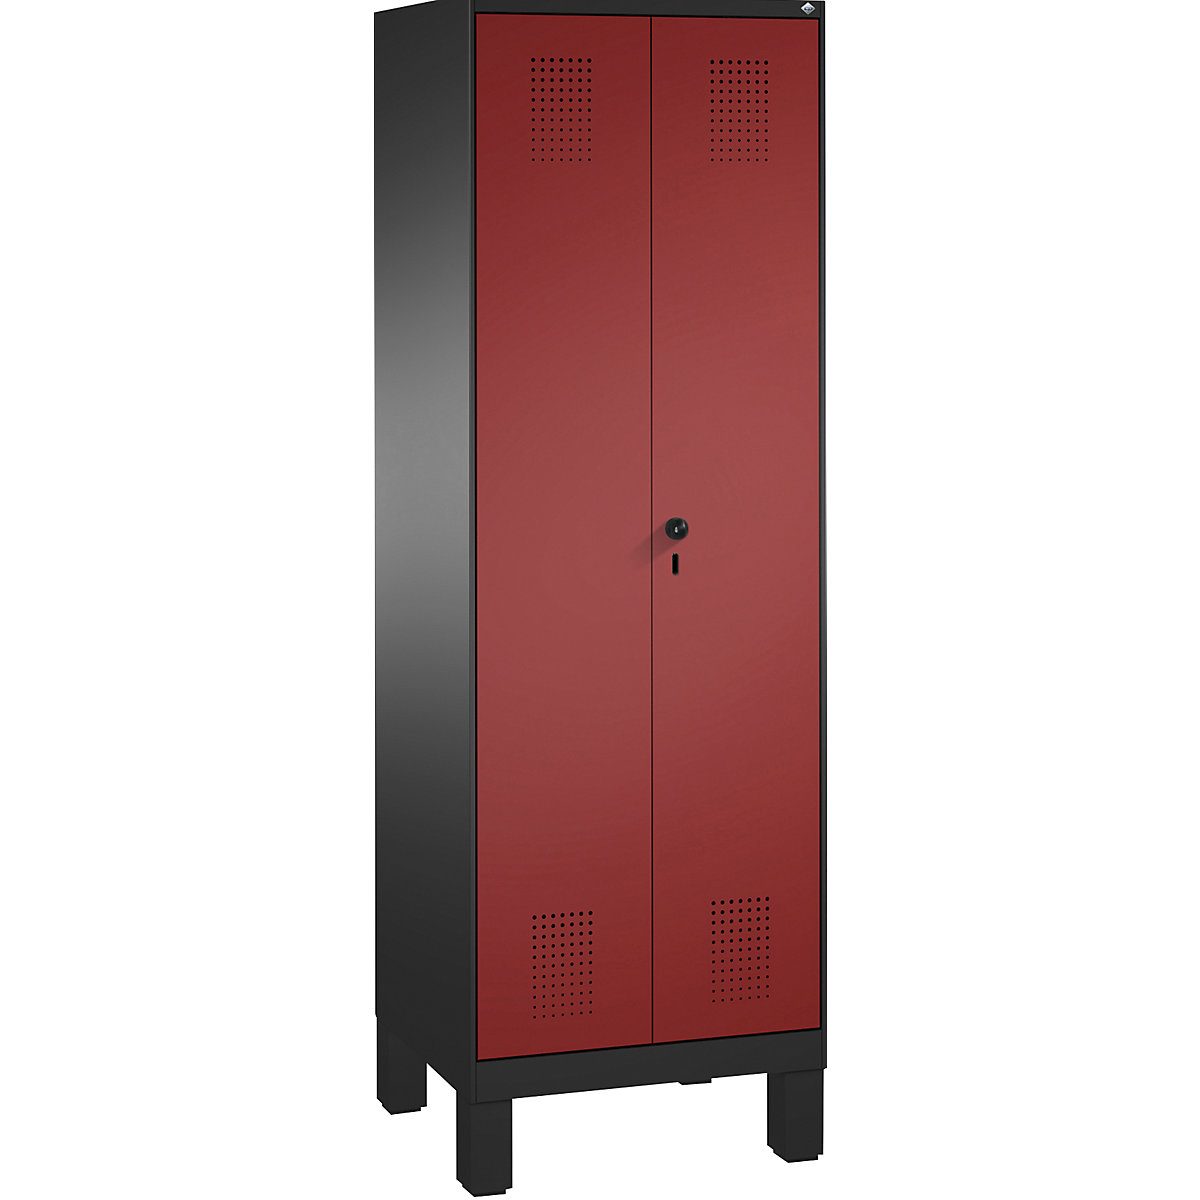 EVOLO laundry cupboard / cloakroom locker – C+P, 4 shelves, clothes rail, compartments 2 x 300 mm, with feet, black grey / ruby red-5